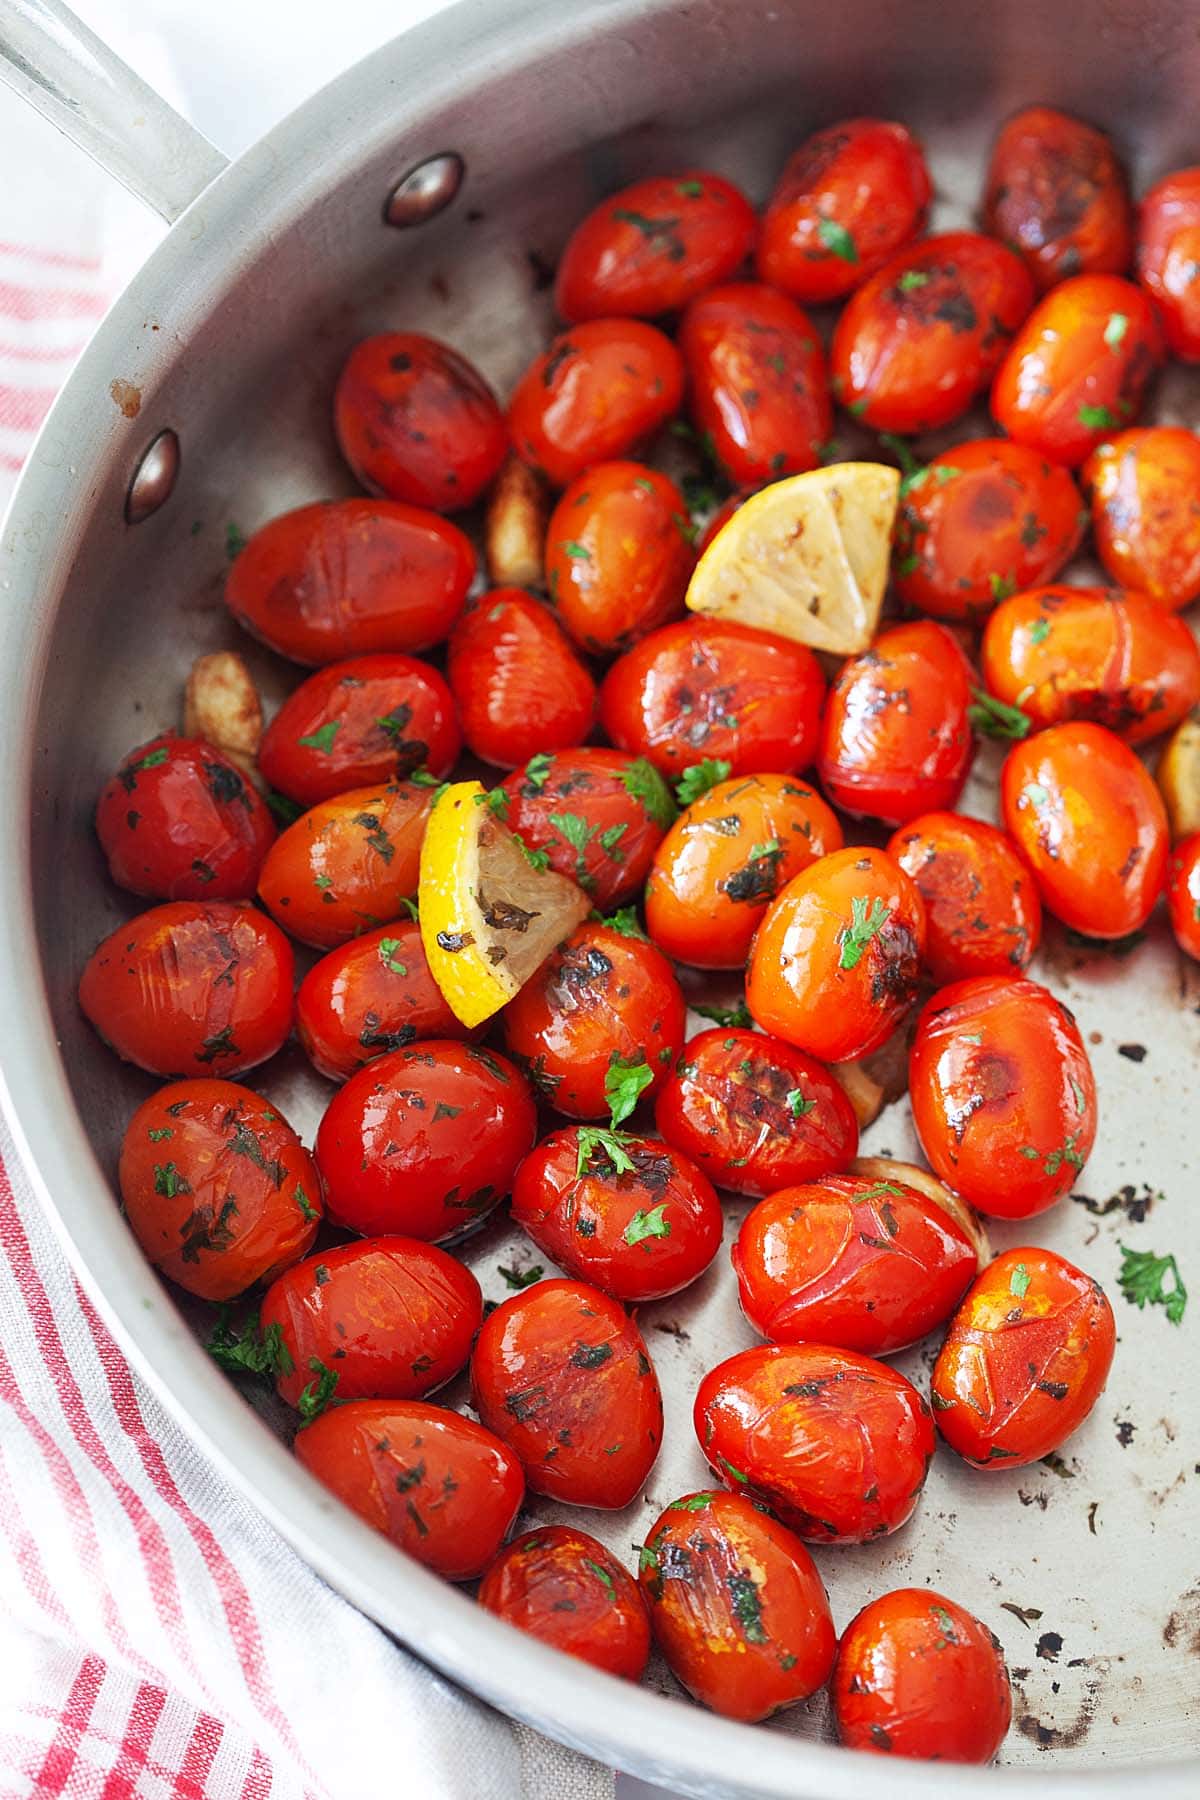 How to grill tomatoes on a stove top and using a pan.